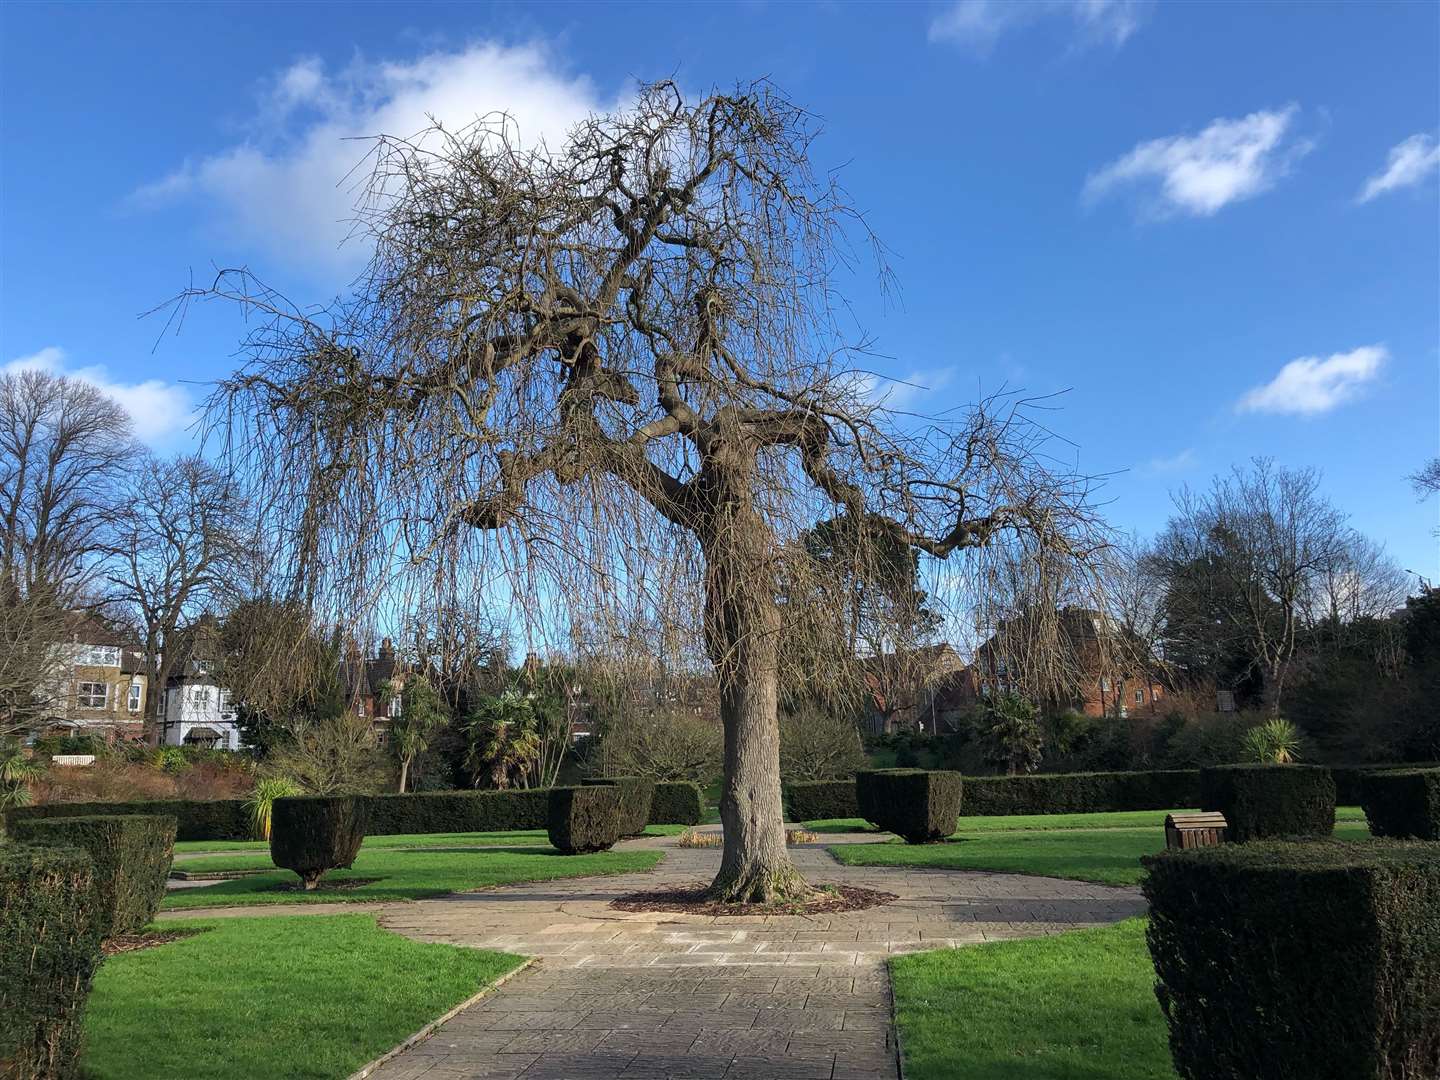 The historic Willow tree in Kingsnorth Gardens.